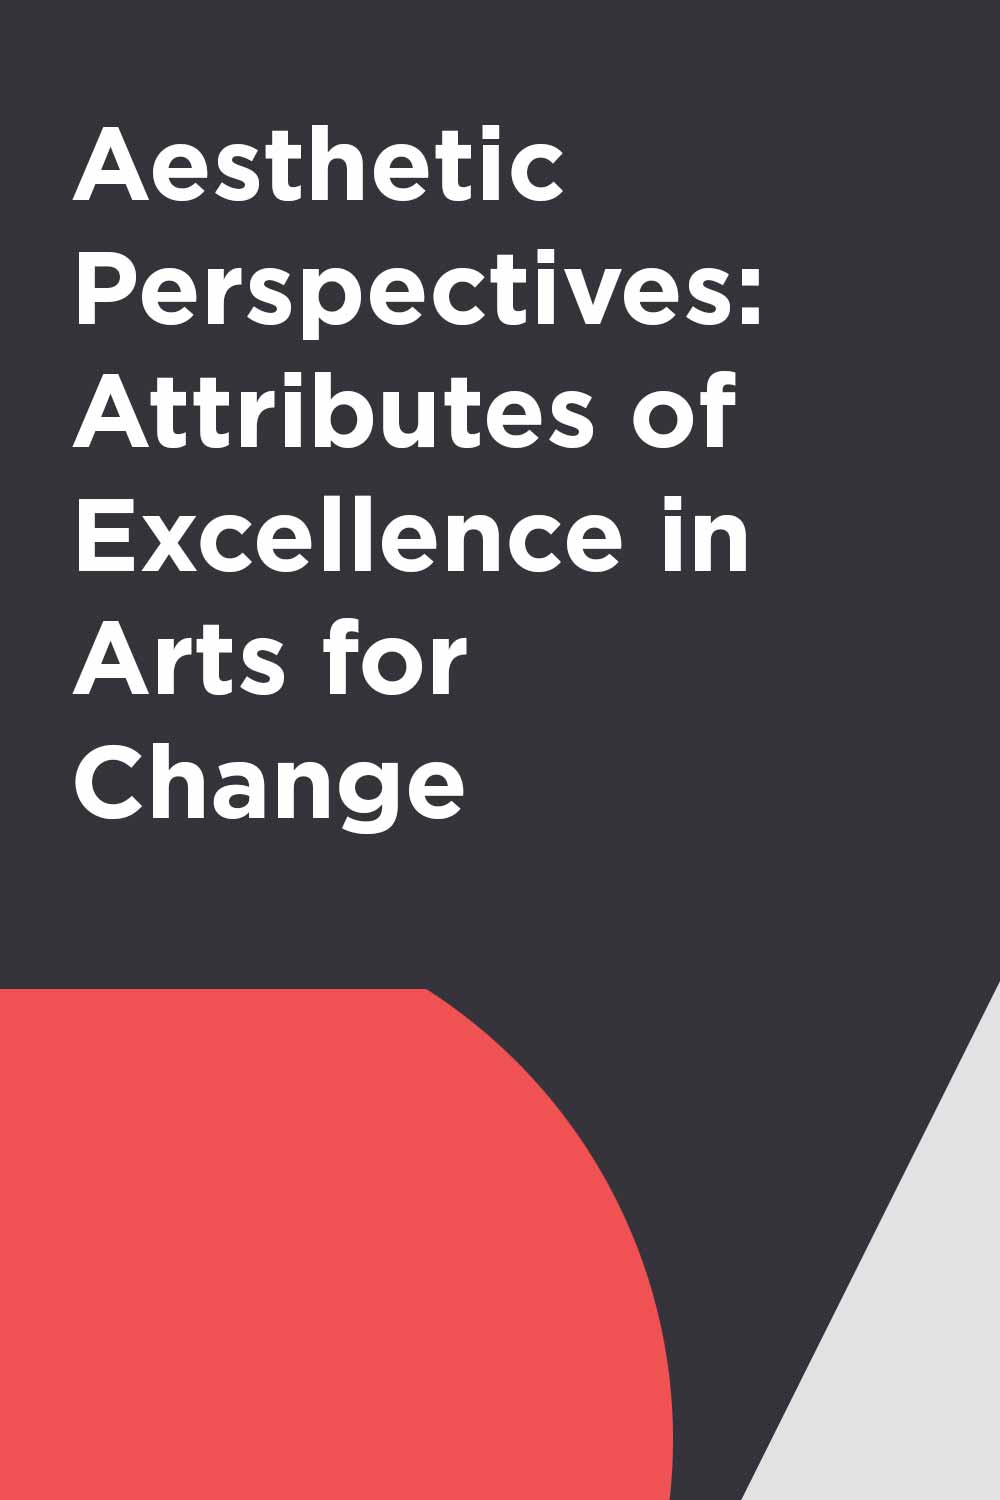 Aesthetic Perspectives: Attributes of Excellence in Arts for Change